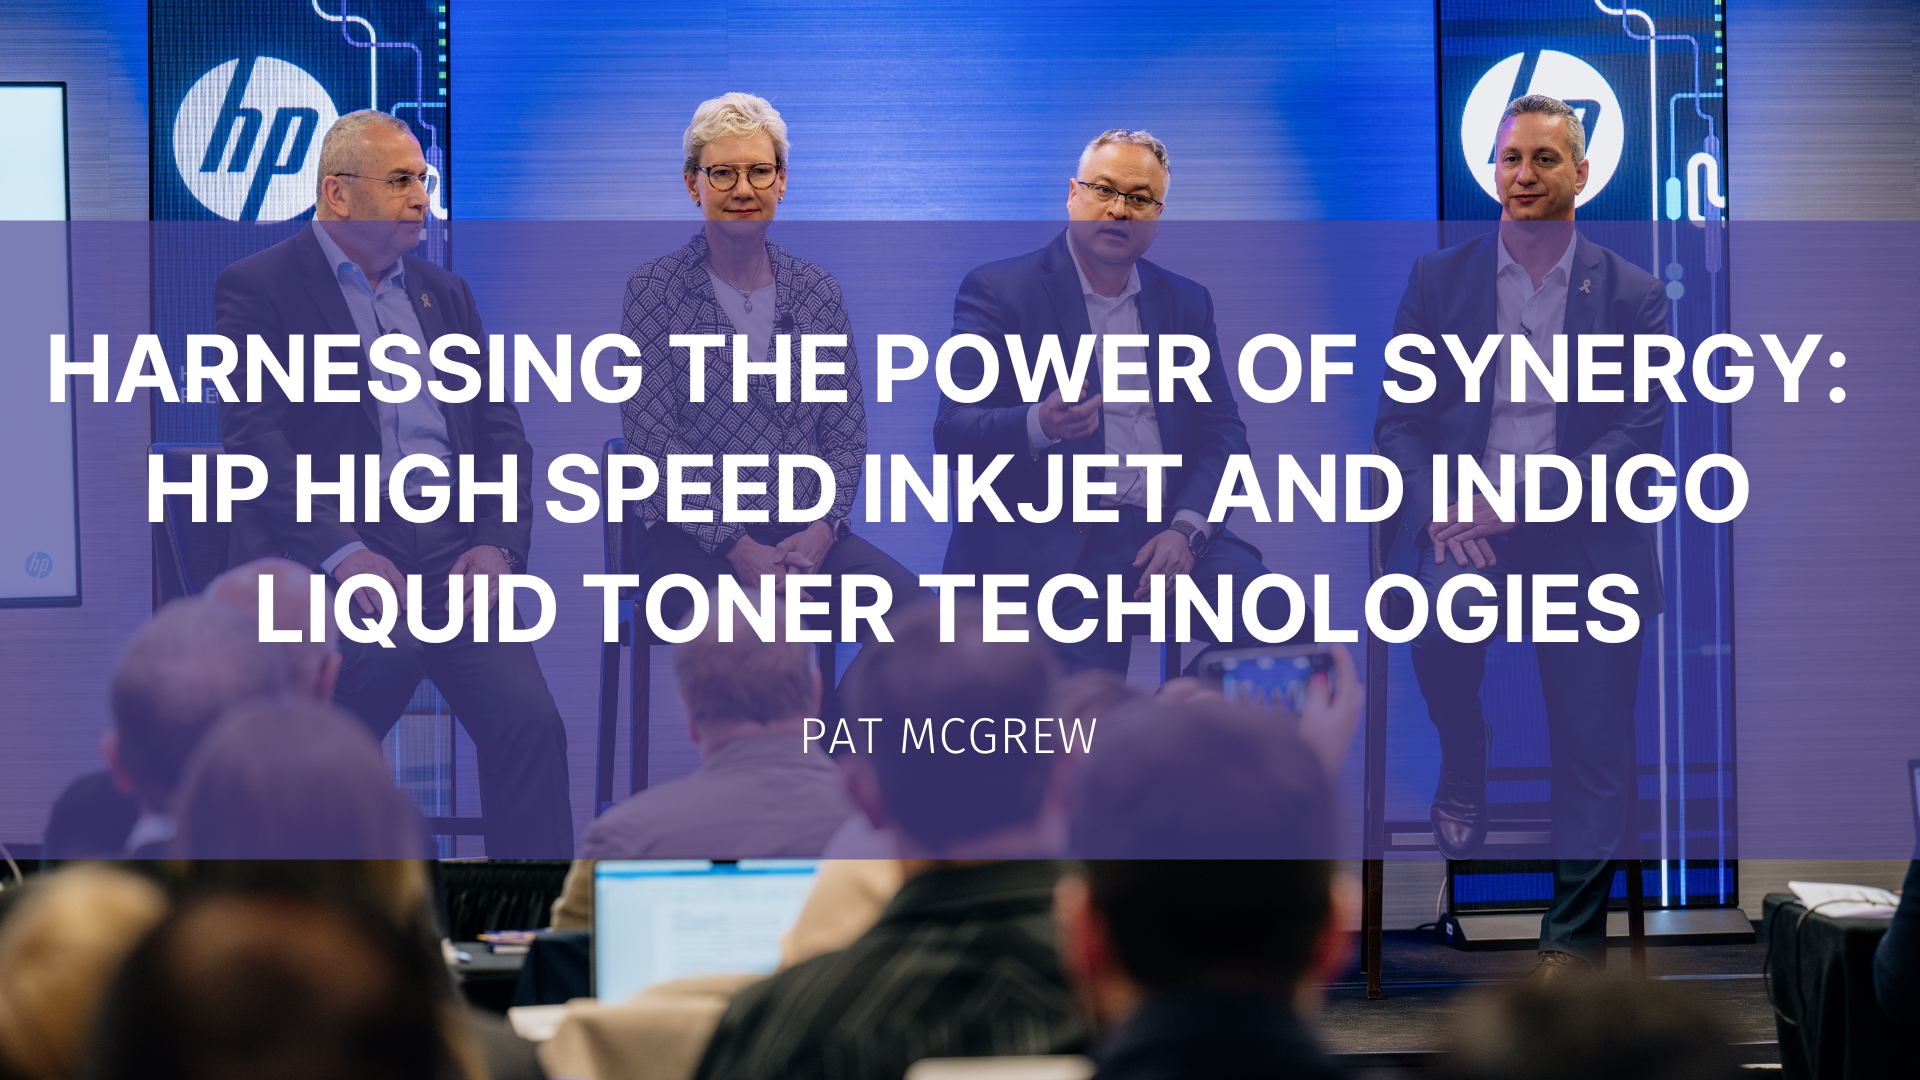 Featured image for “Harnessing the Power of Synergy: HP High Speed Inkjet and Indigo Liquid Toner Technologies”